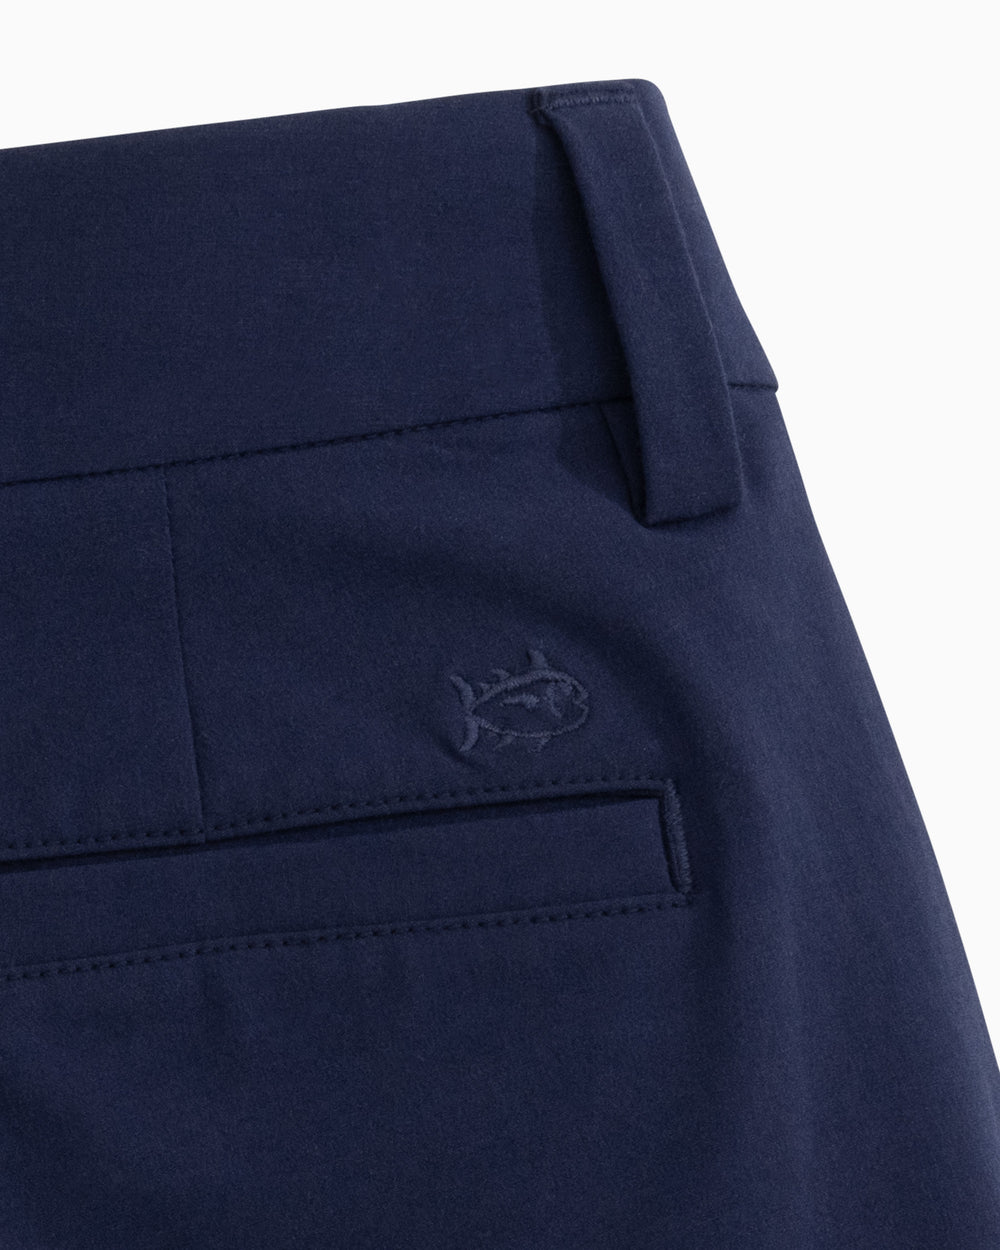 The detail view of the Women's Inlet 4 Inch Performance Short by Southern Tide - Nautical Navy